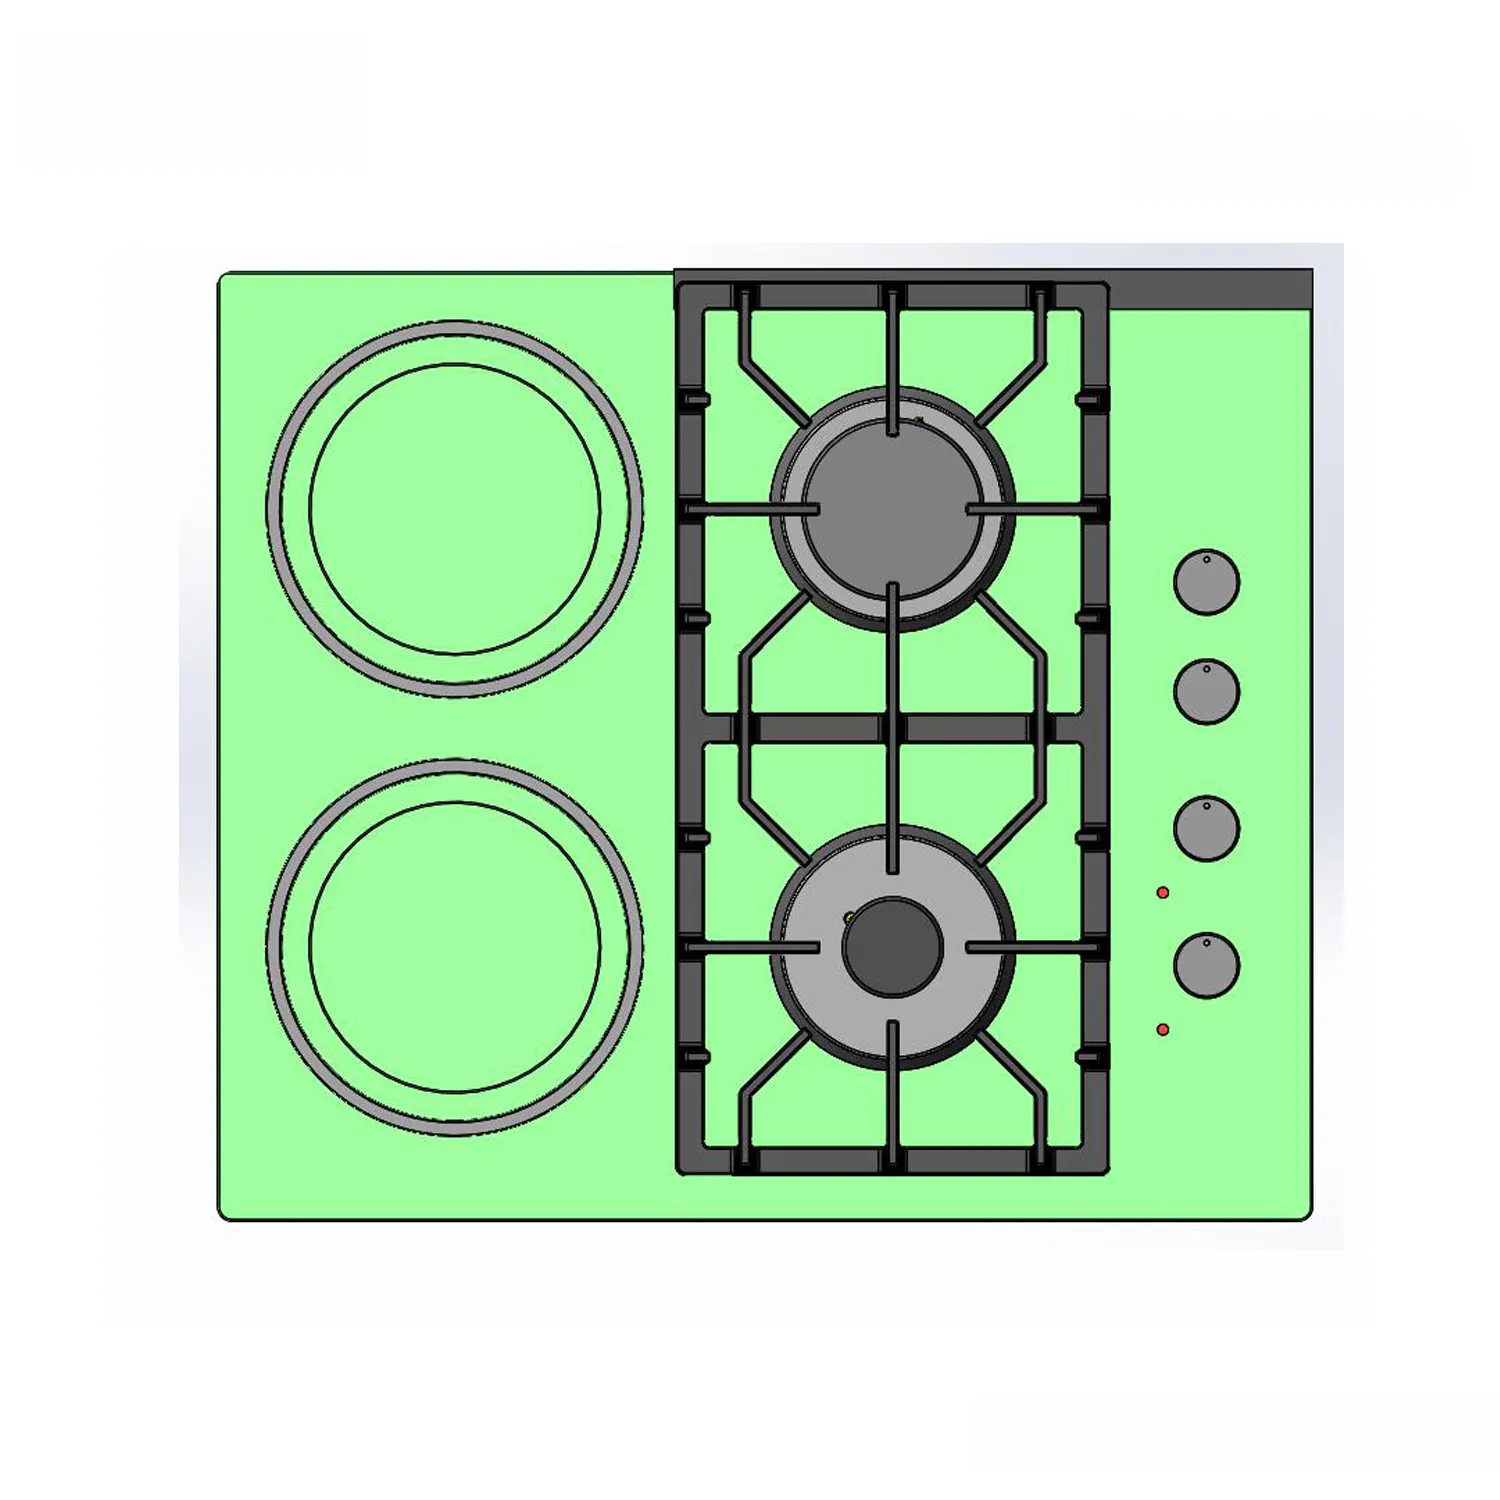 Tempered glass panel built-in installation gas and electric combination cooker stove